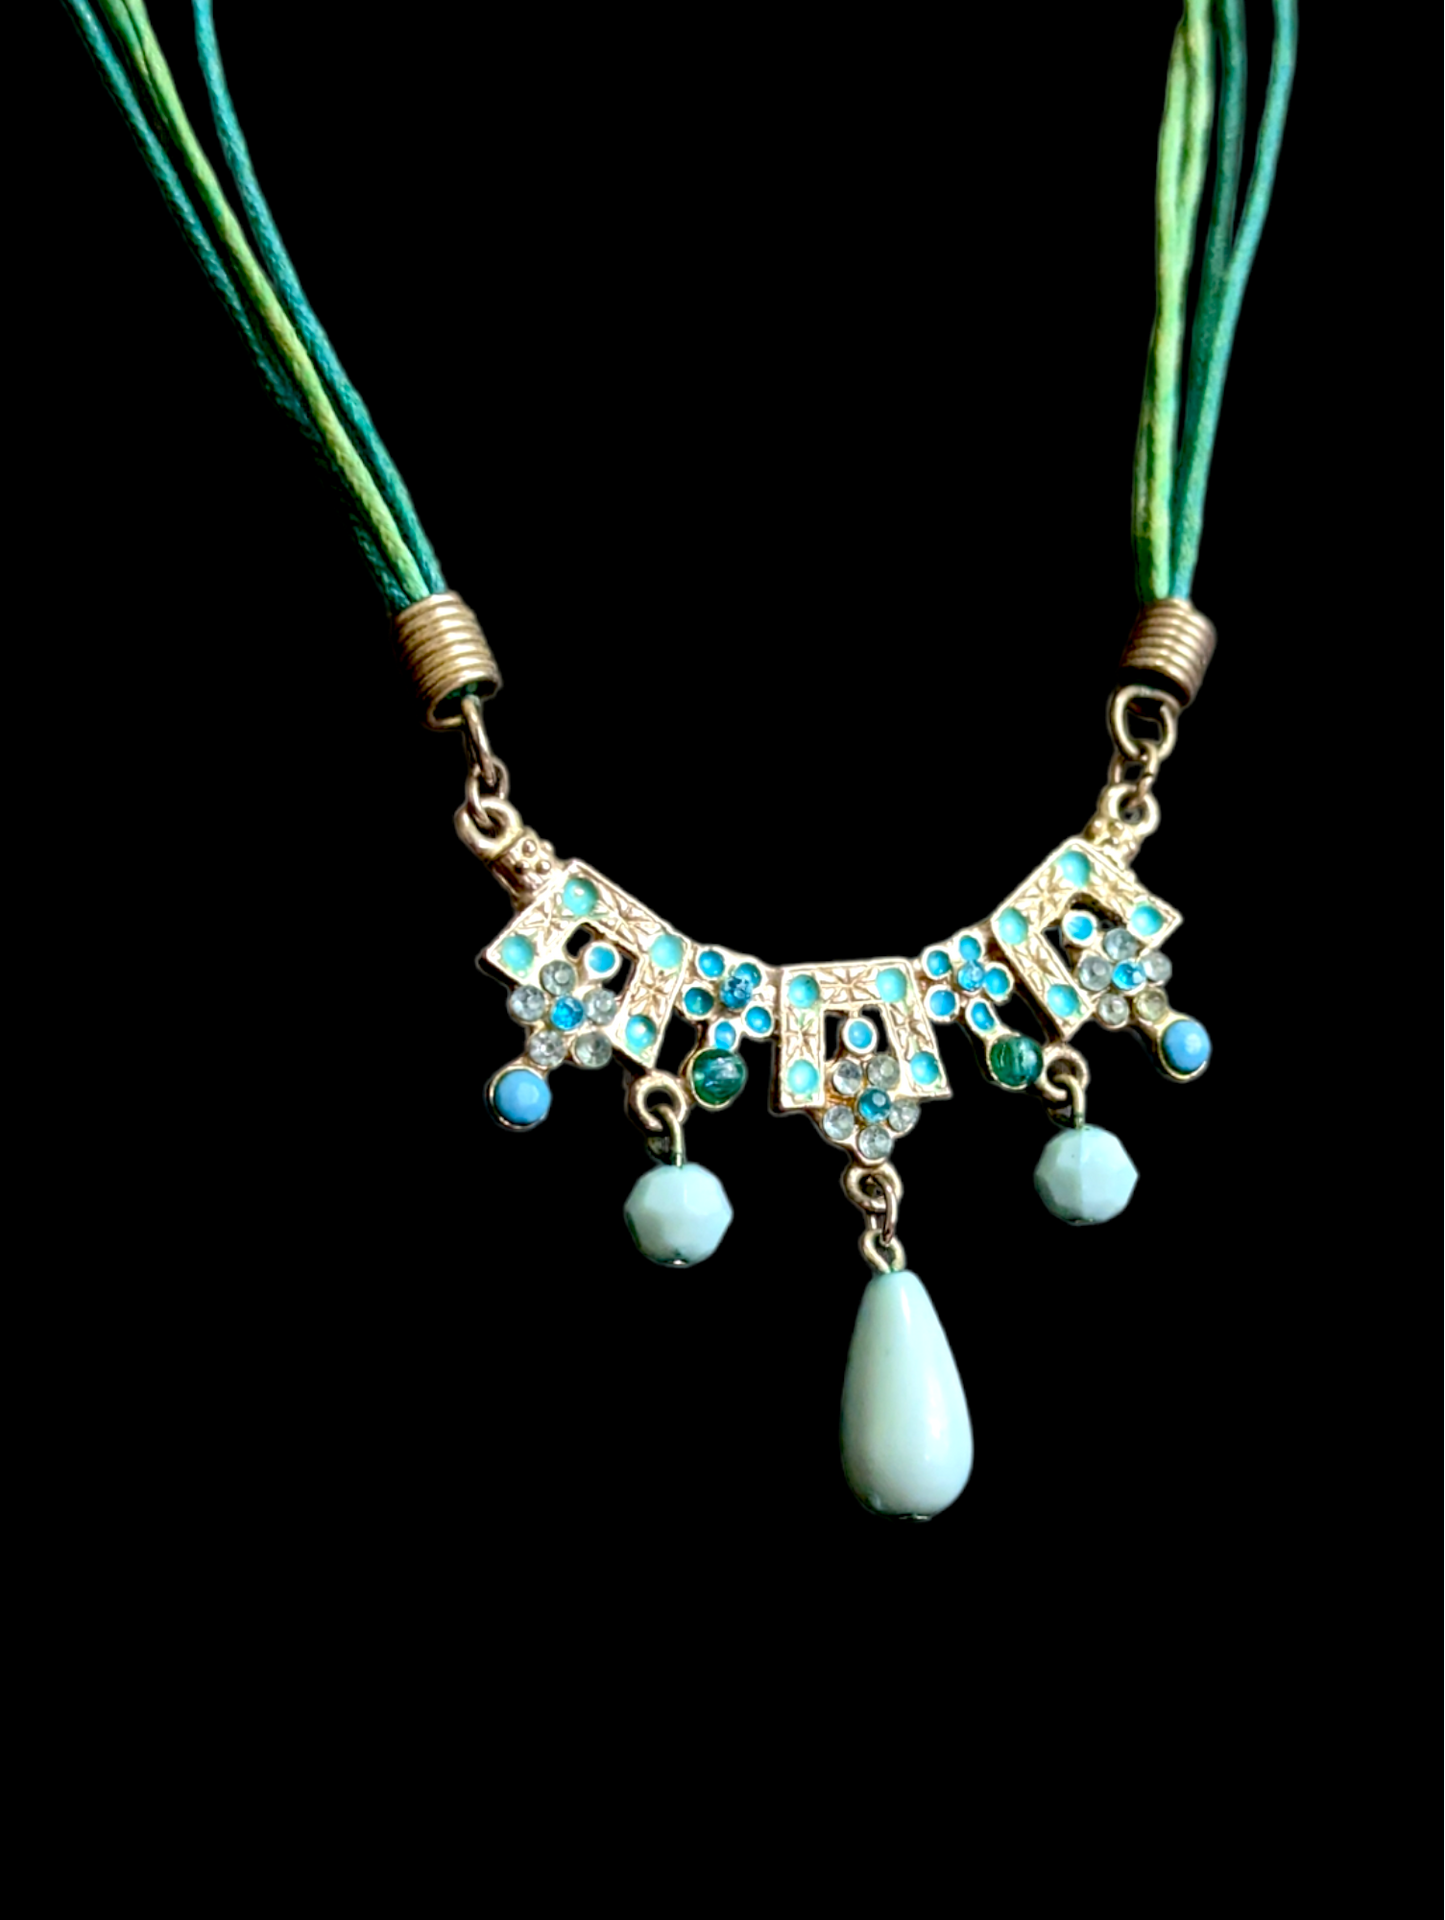 Vintage Tribal Mid-Century Modern Inspired Turquoise Necklace and Chandelier Dangle Earrings Set